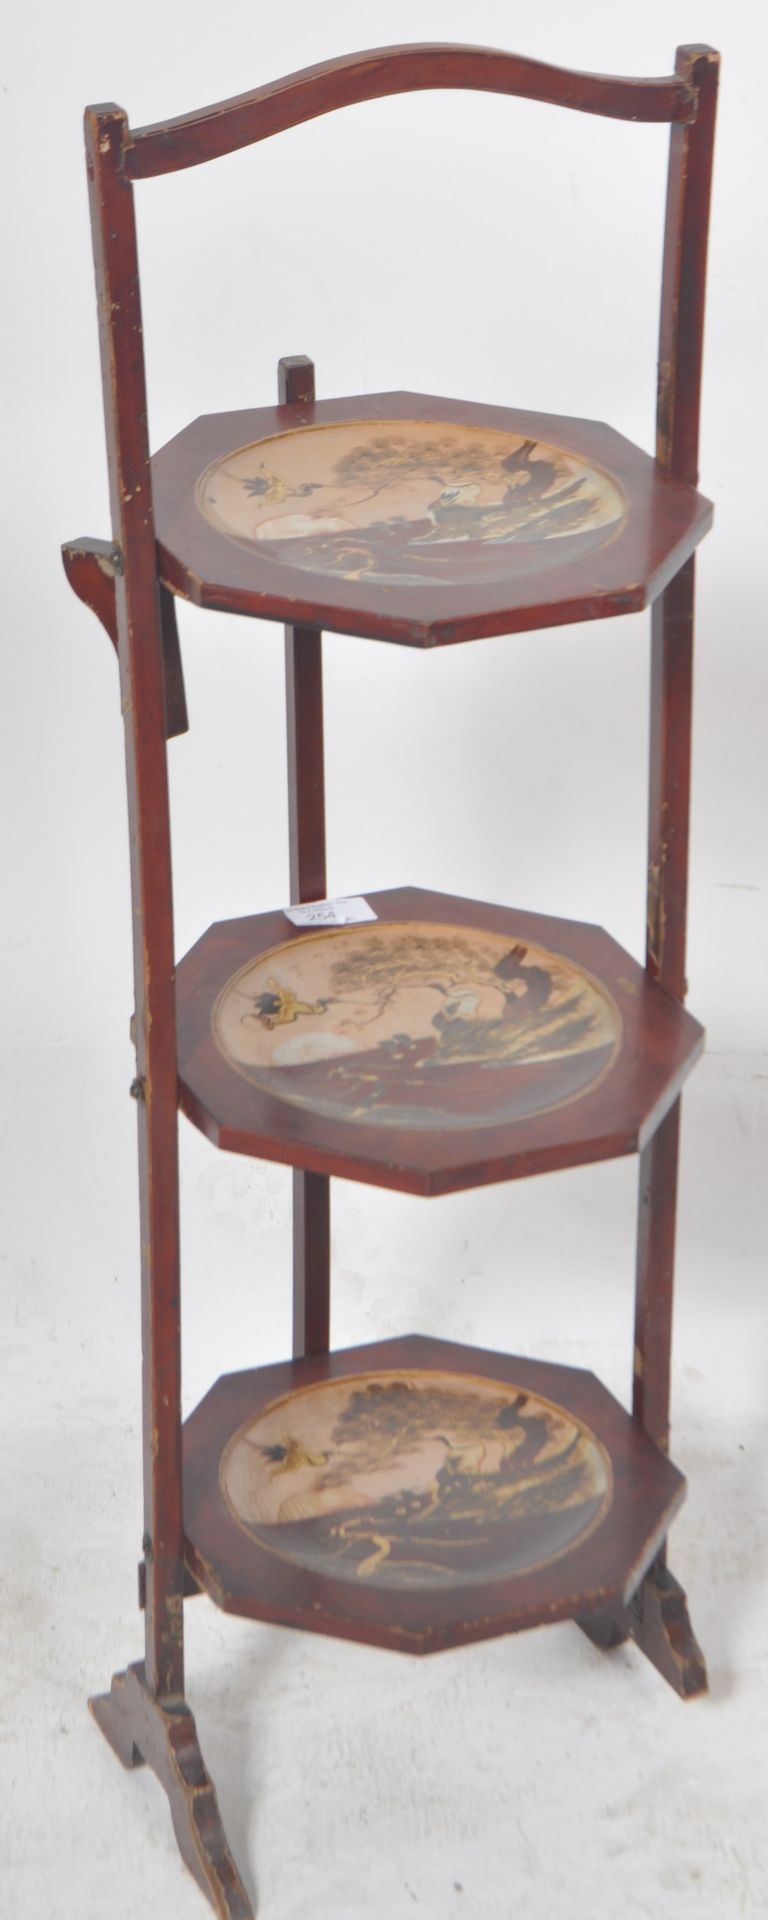 19TH CENTURY CHINESE THREE TIER CAKE / PLATE STAND - Image 2 of 8